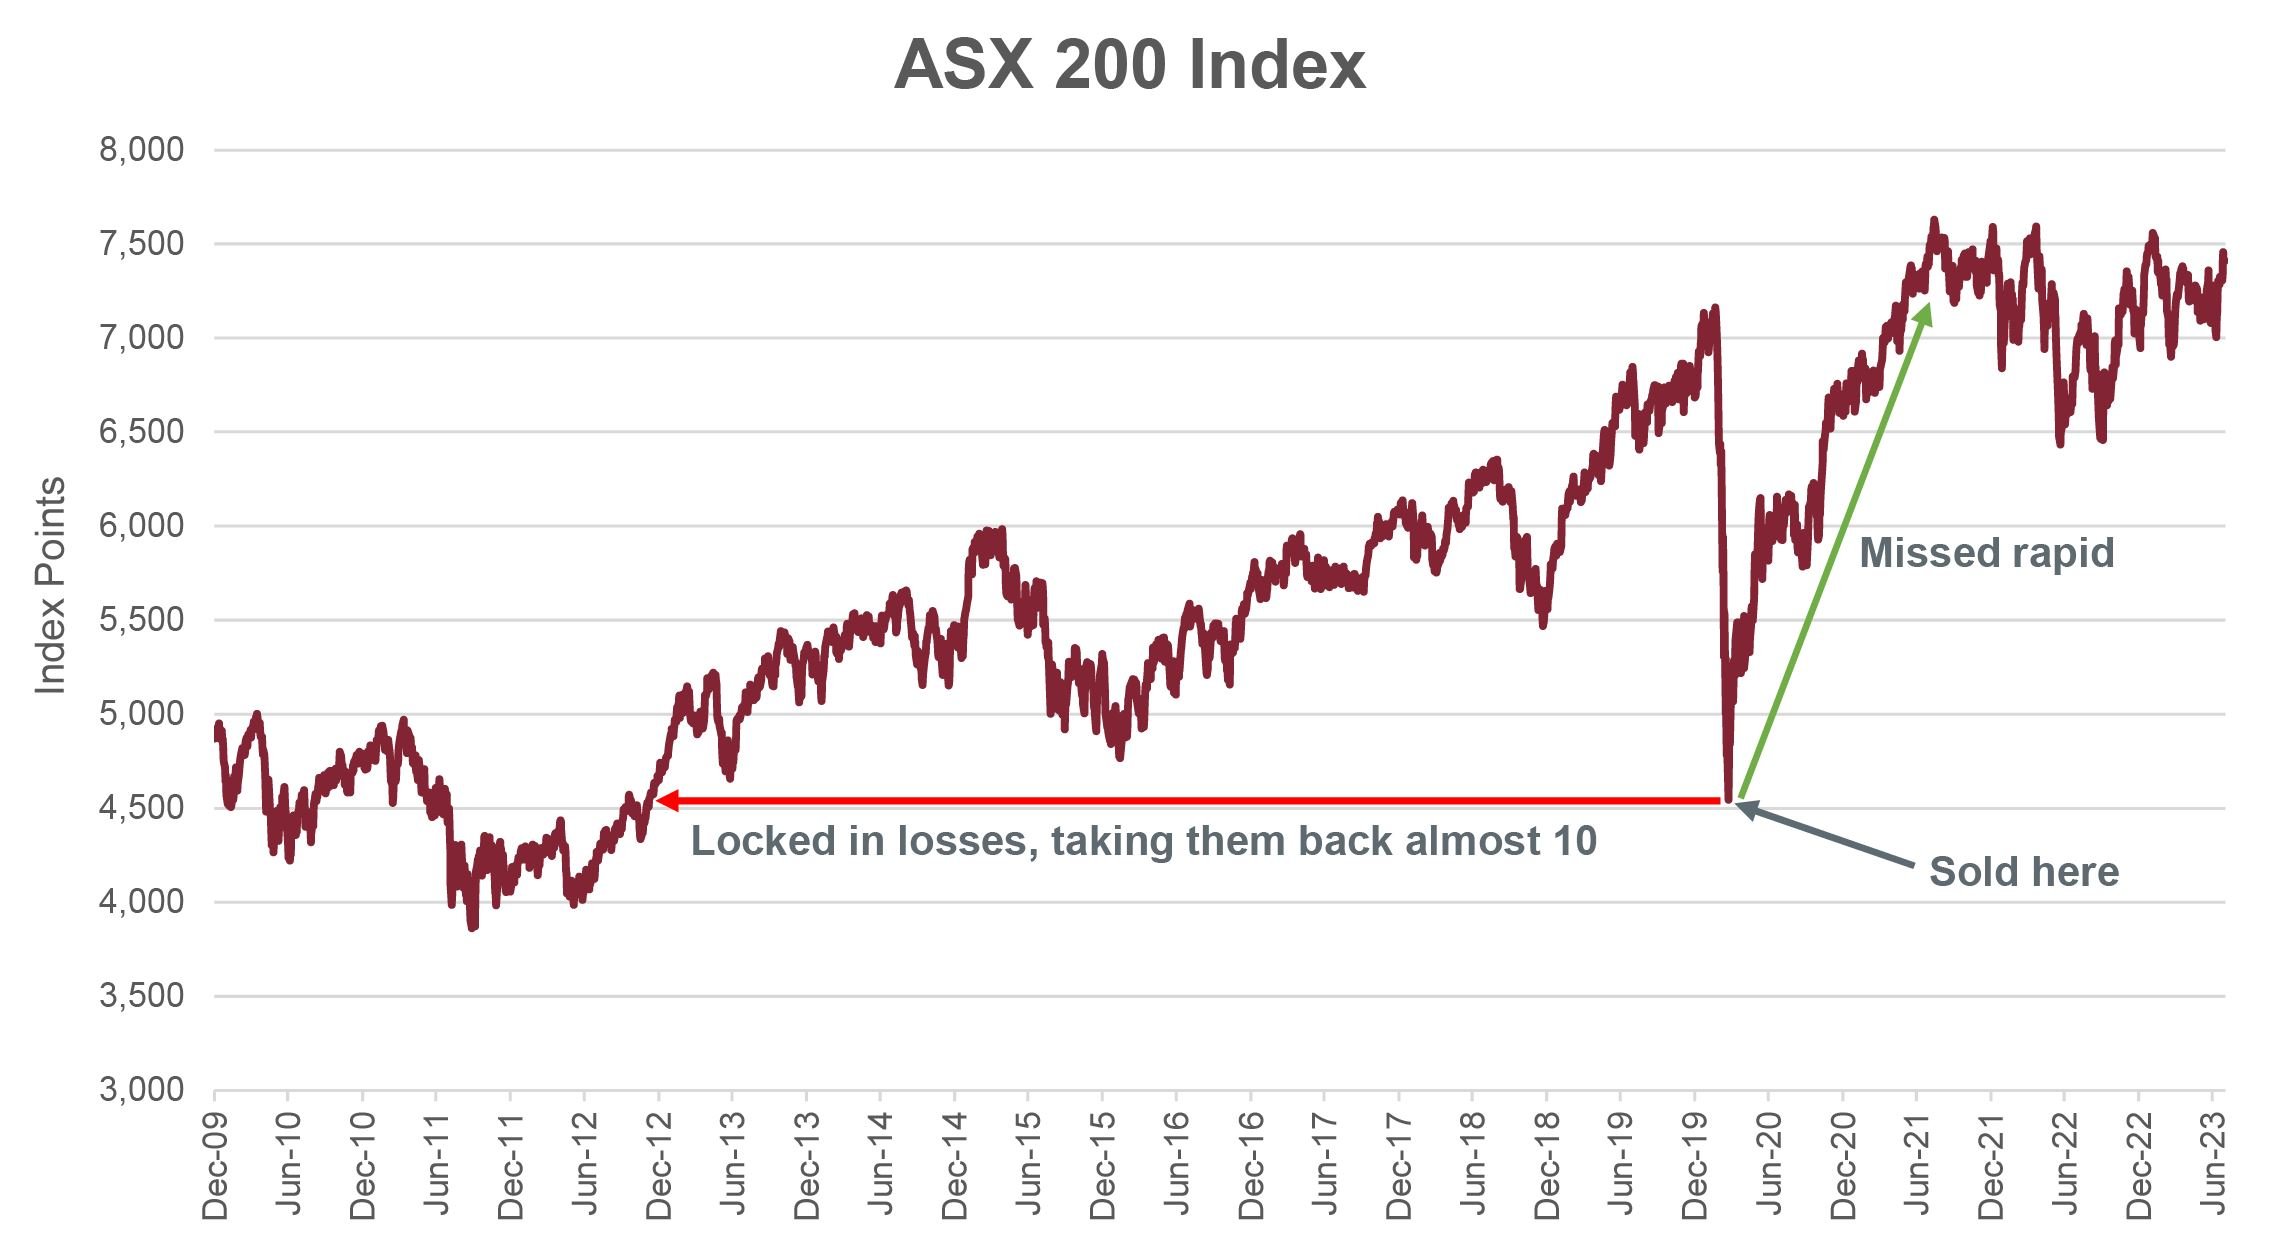 ASX 200 Index graph of index value changes during Covid-19